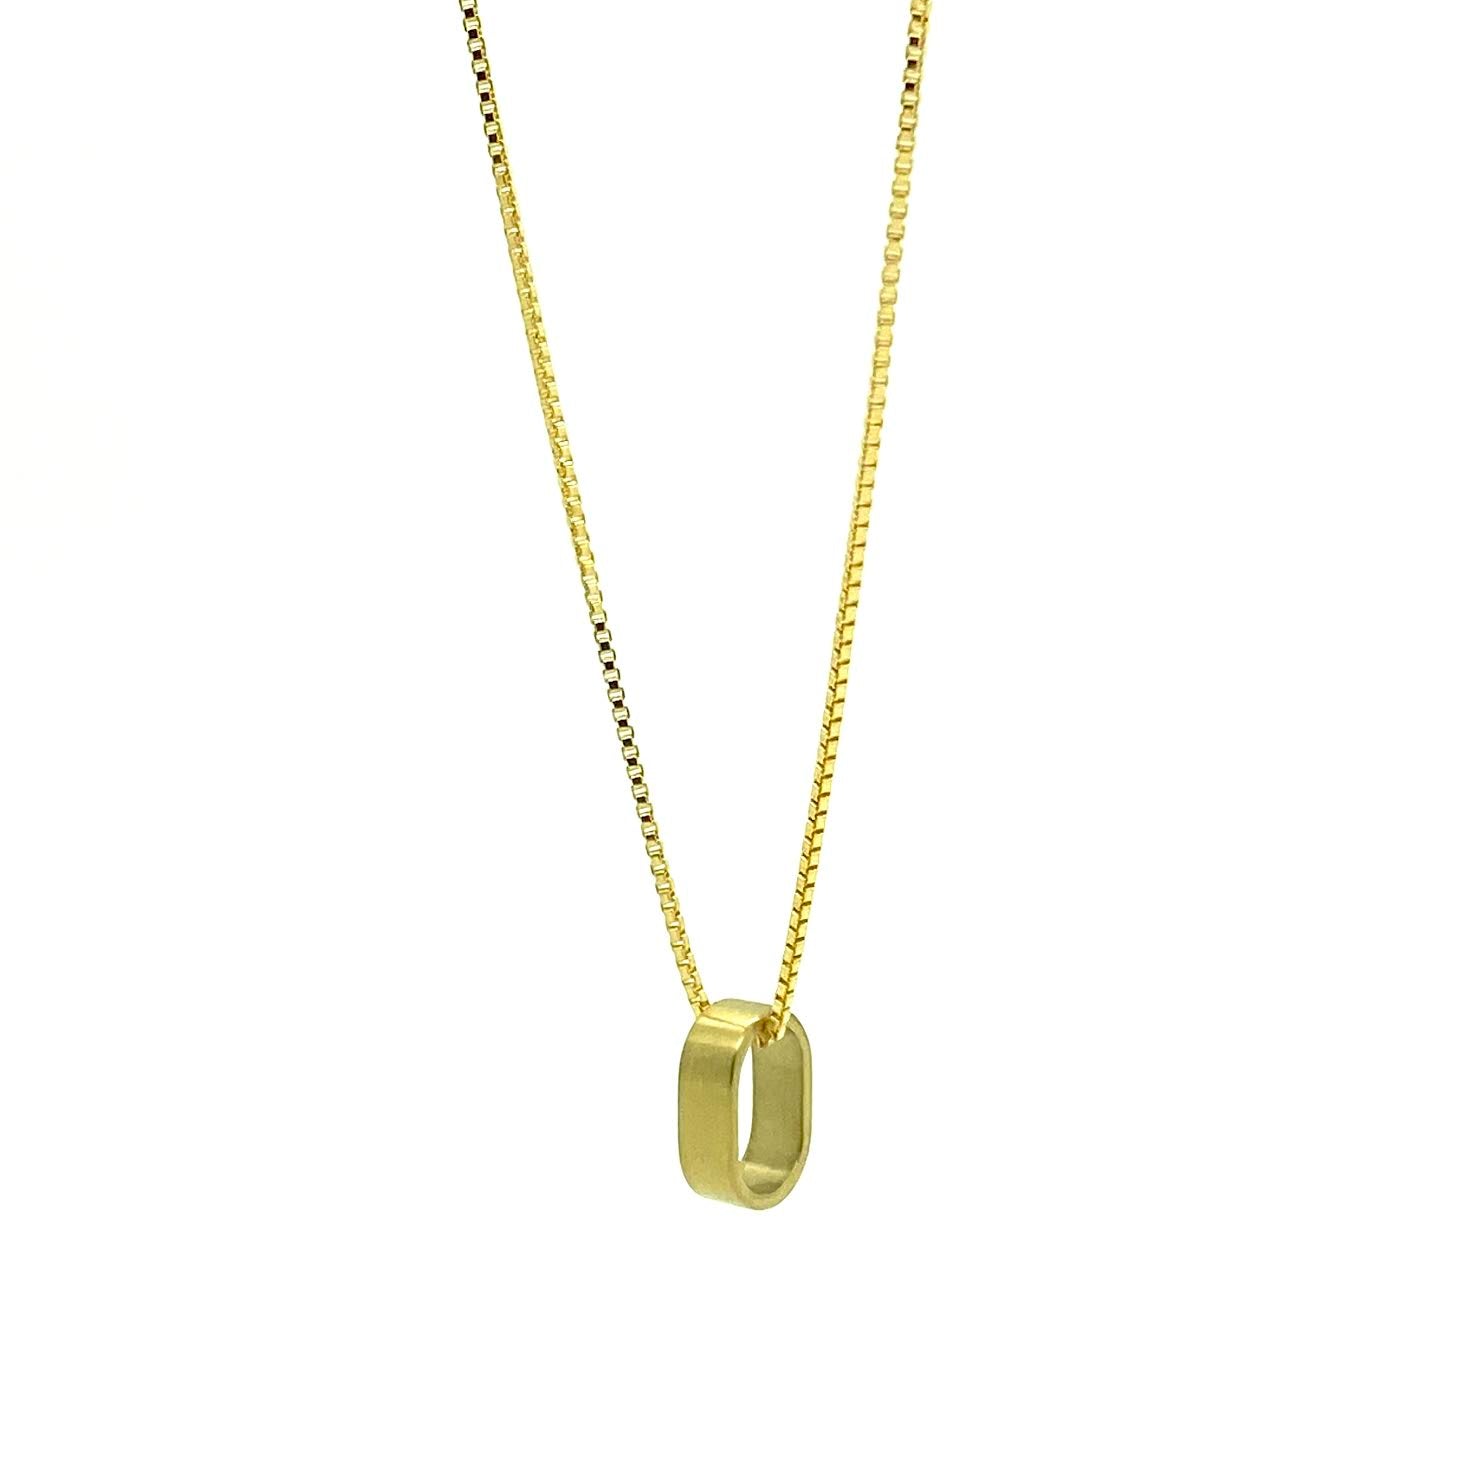 This meticulously designed with a geometrical flavor, brushed yellow gold pendant necklace is perfect worn alone or paired with a WristBend stacking bracelet. Made by WristBend